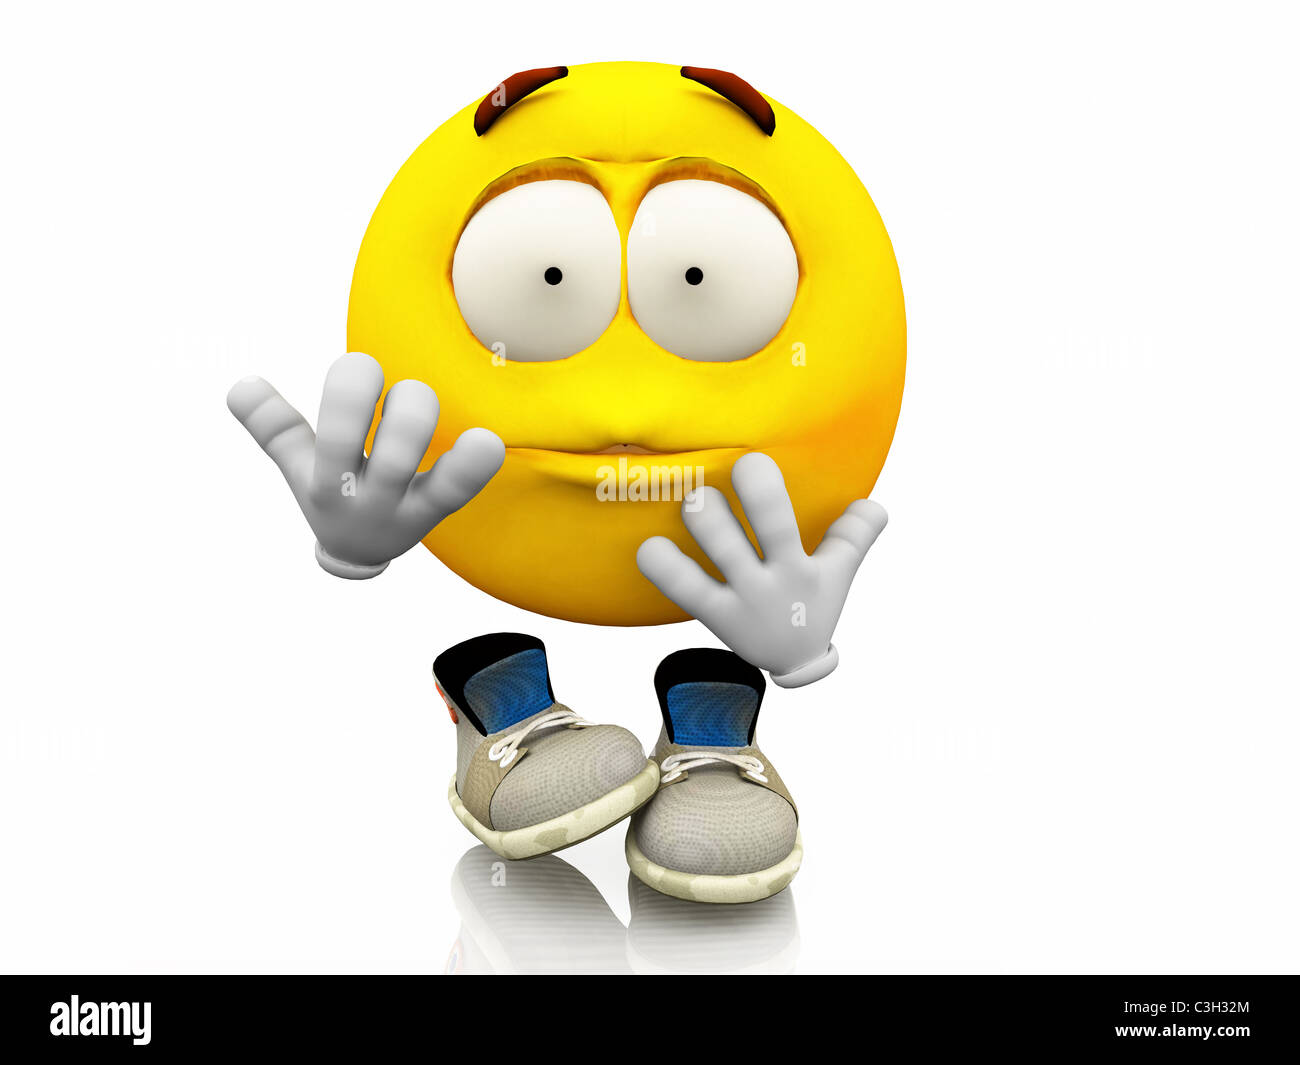 Smiley, emoticon. Facial expression. Disappointed emotional expression on a yellow face with large eyes with shoes. Stock Photo